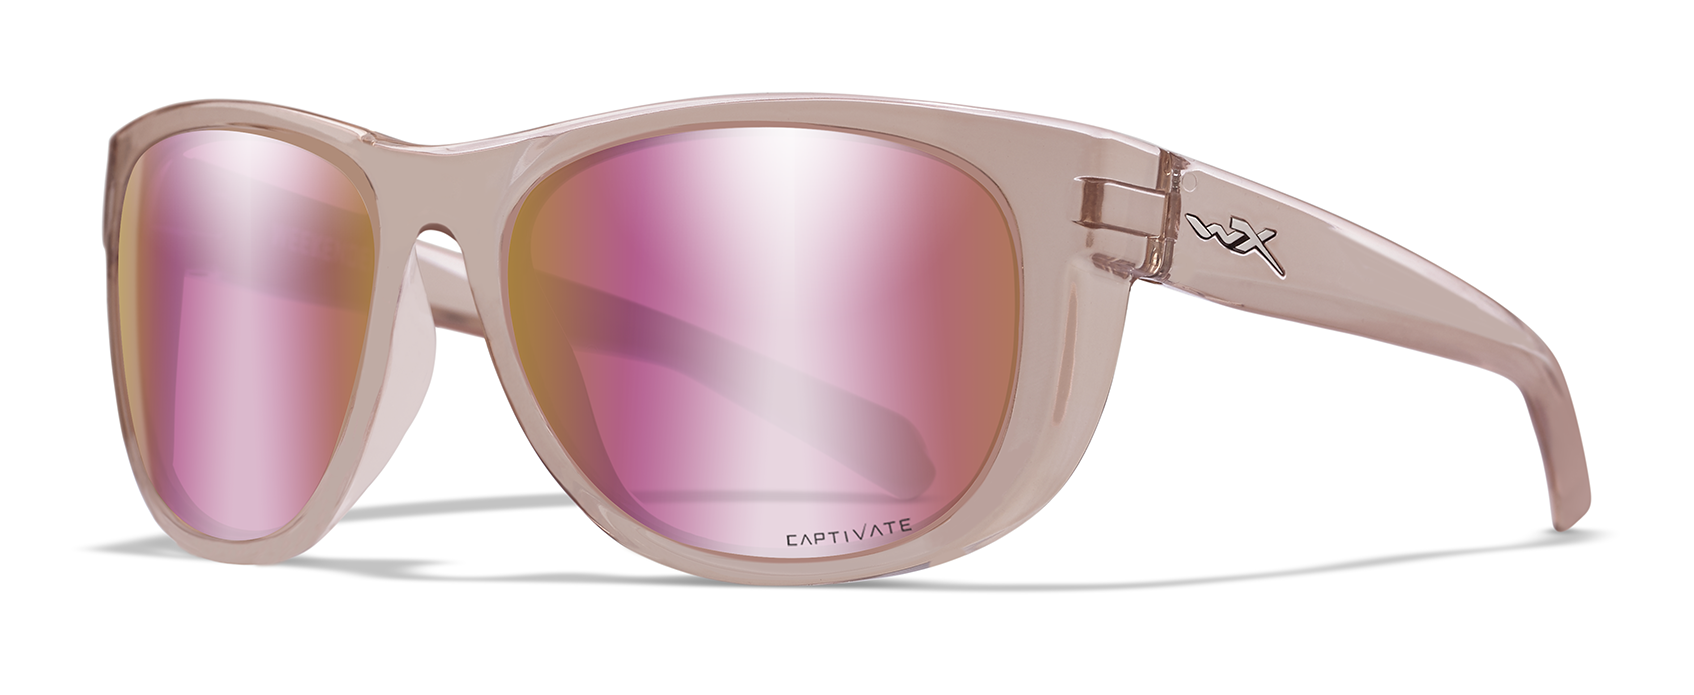 wiley x weekender women's fishing sunglasses in blush with rose gold mirror lenses